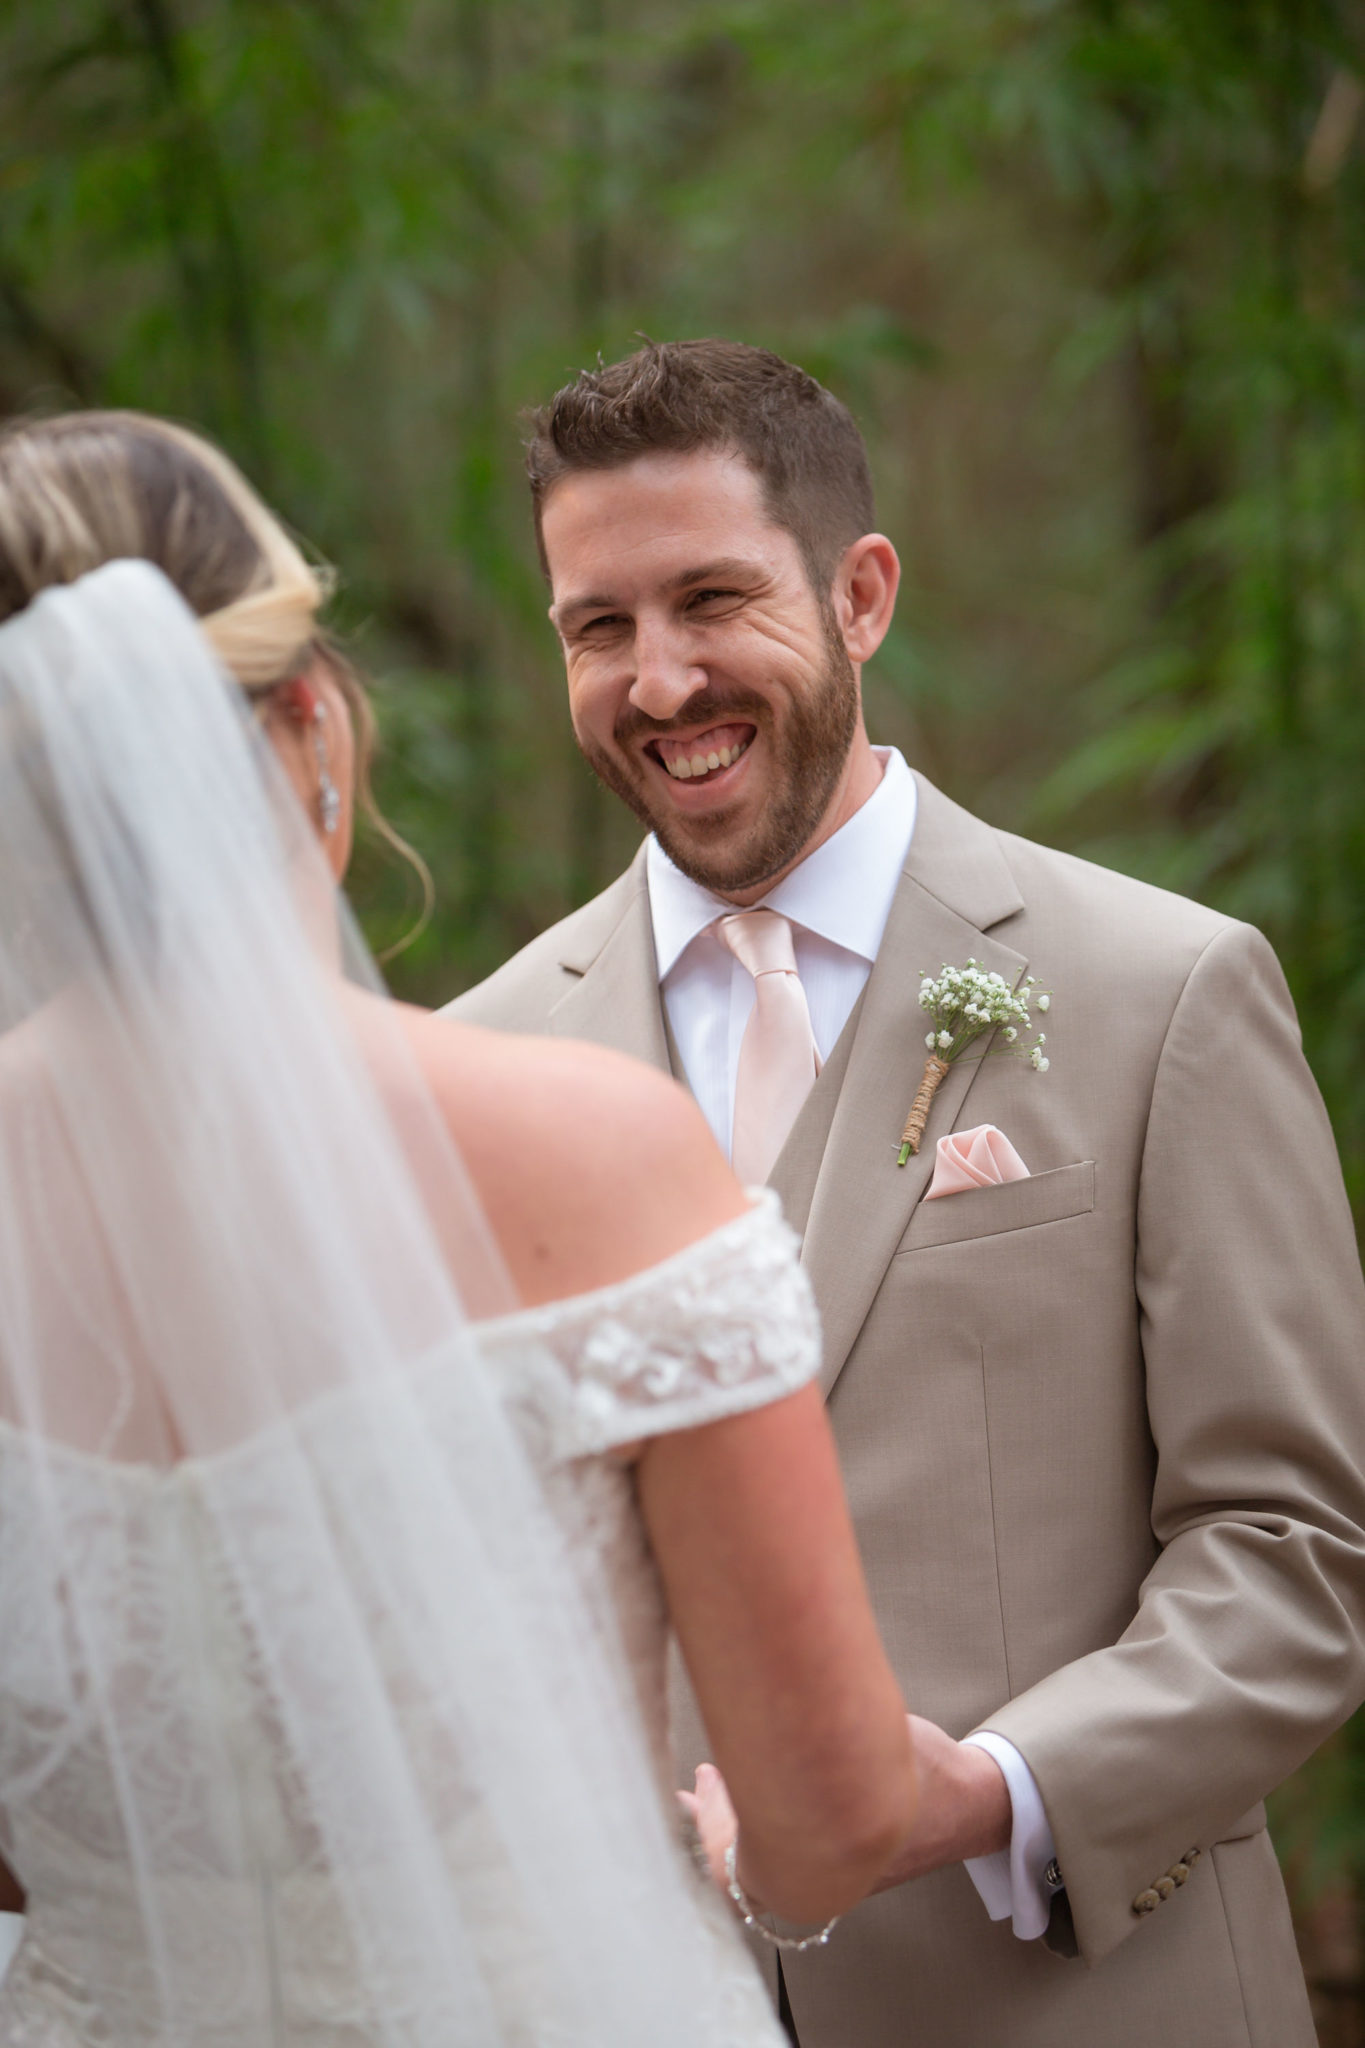 The groom smiling at his bride during the ceremony.